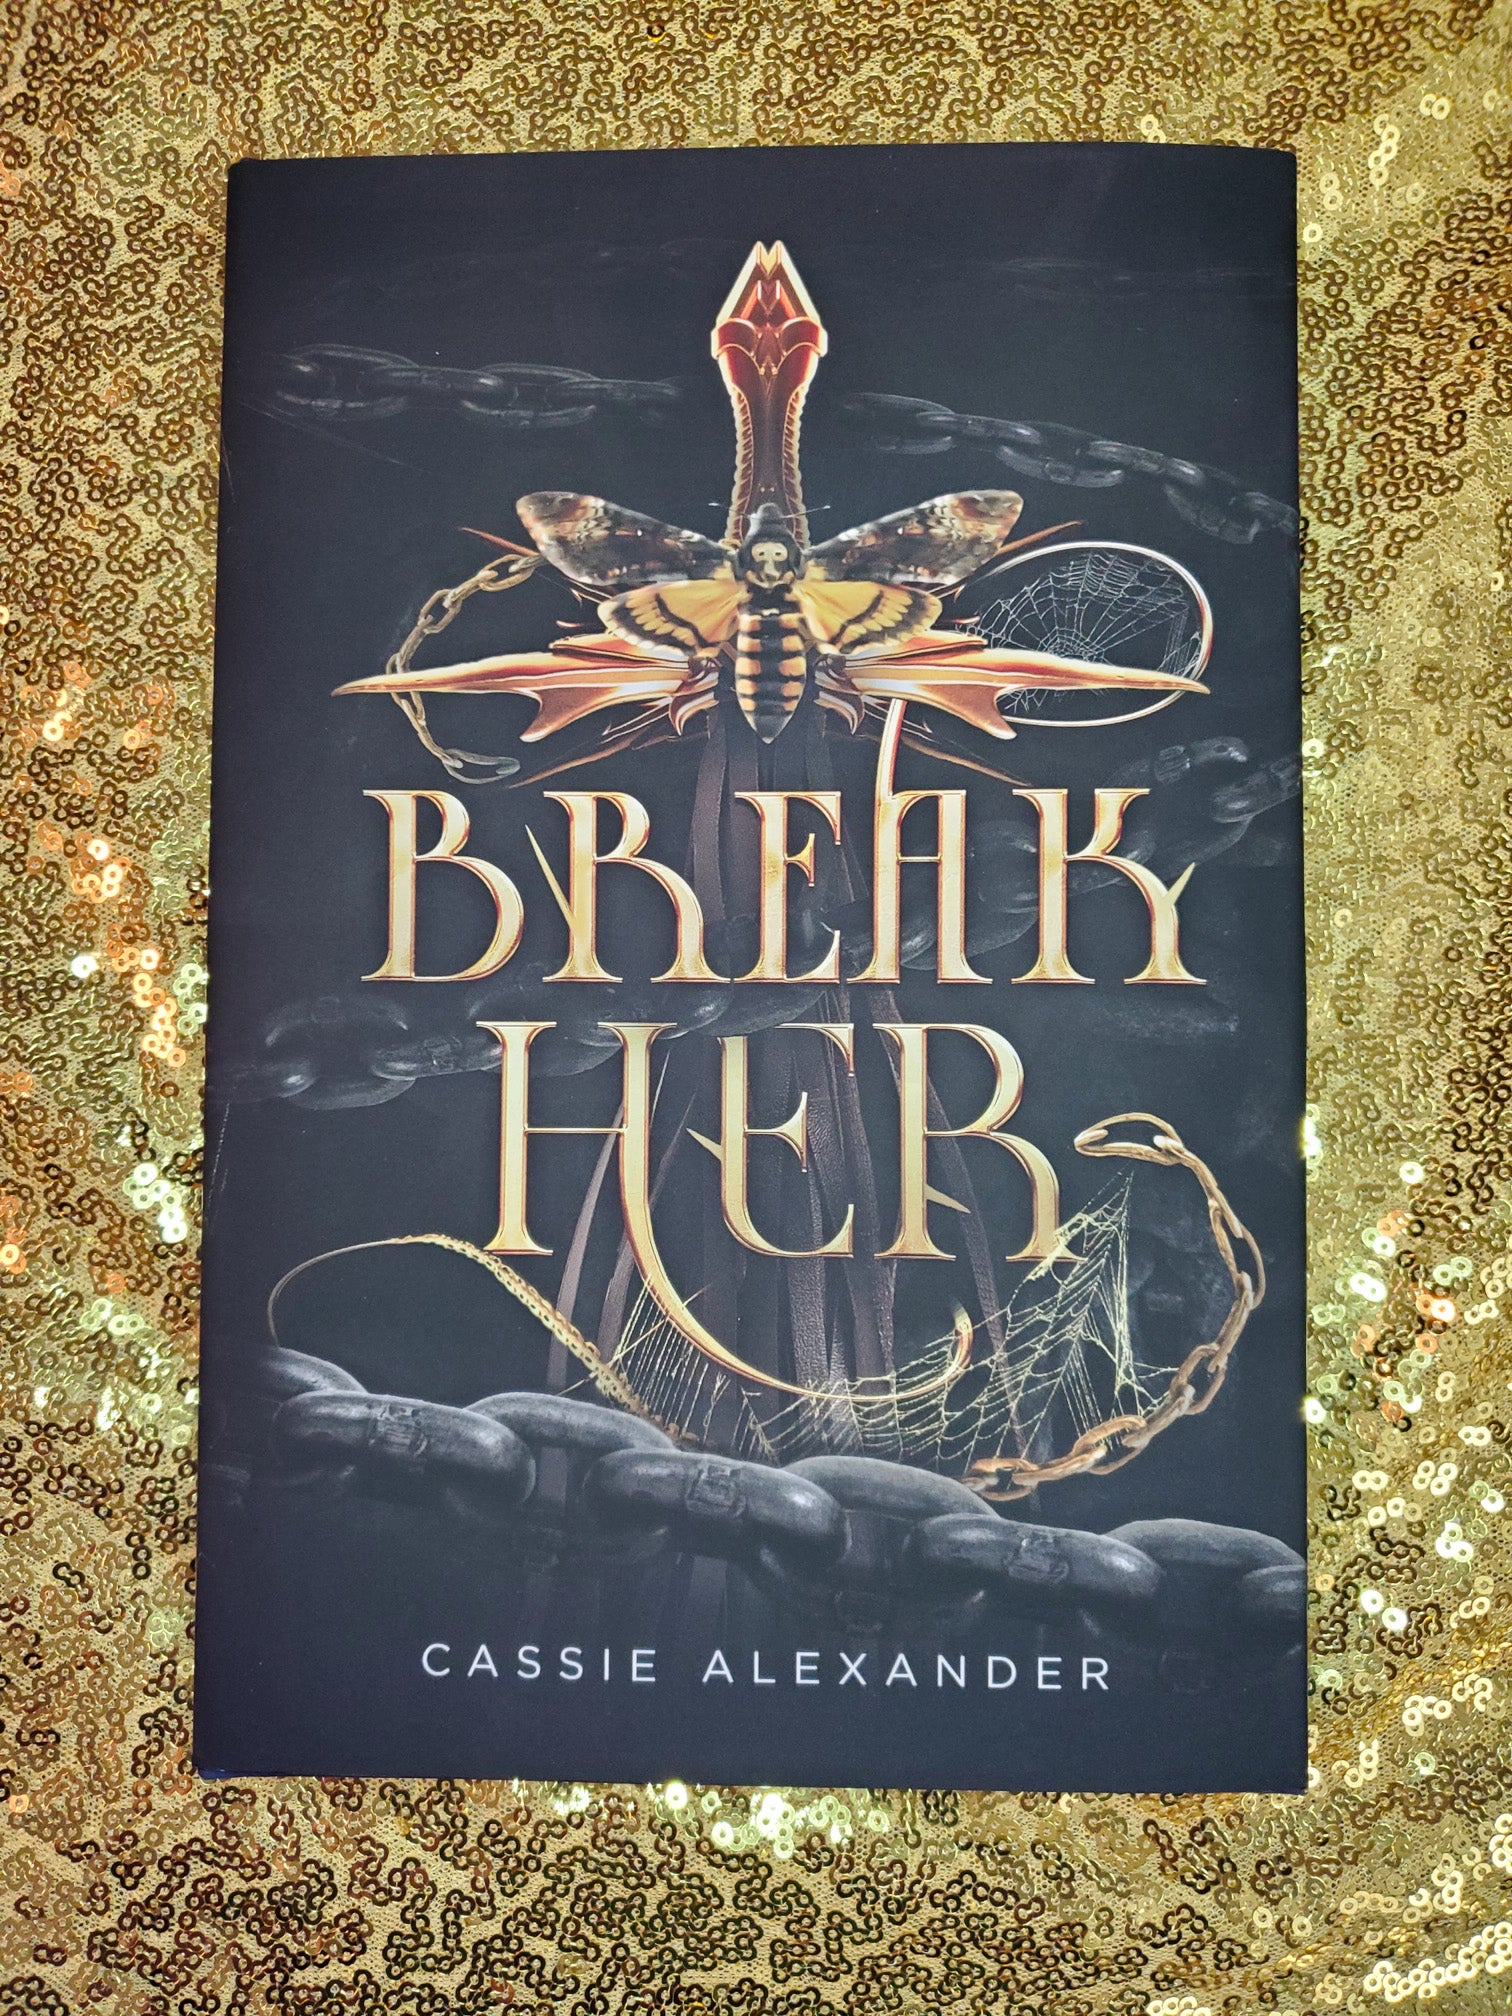 Hardcover of Break Her by Cassie Alexander on a gold sequined background.